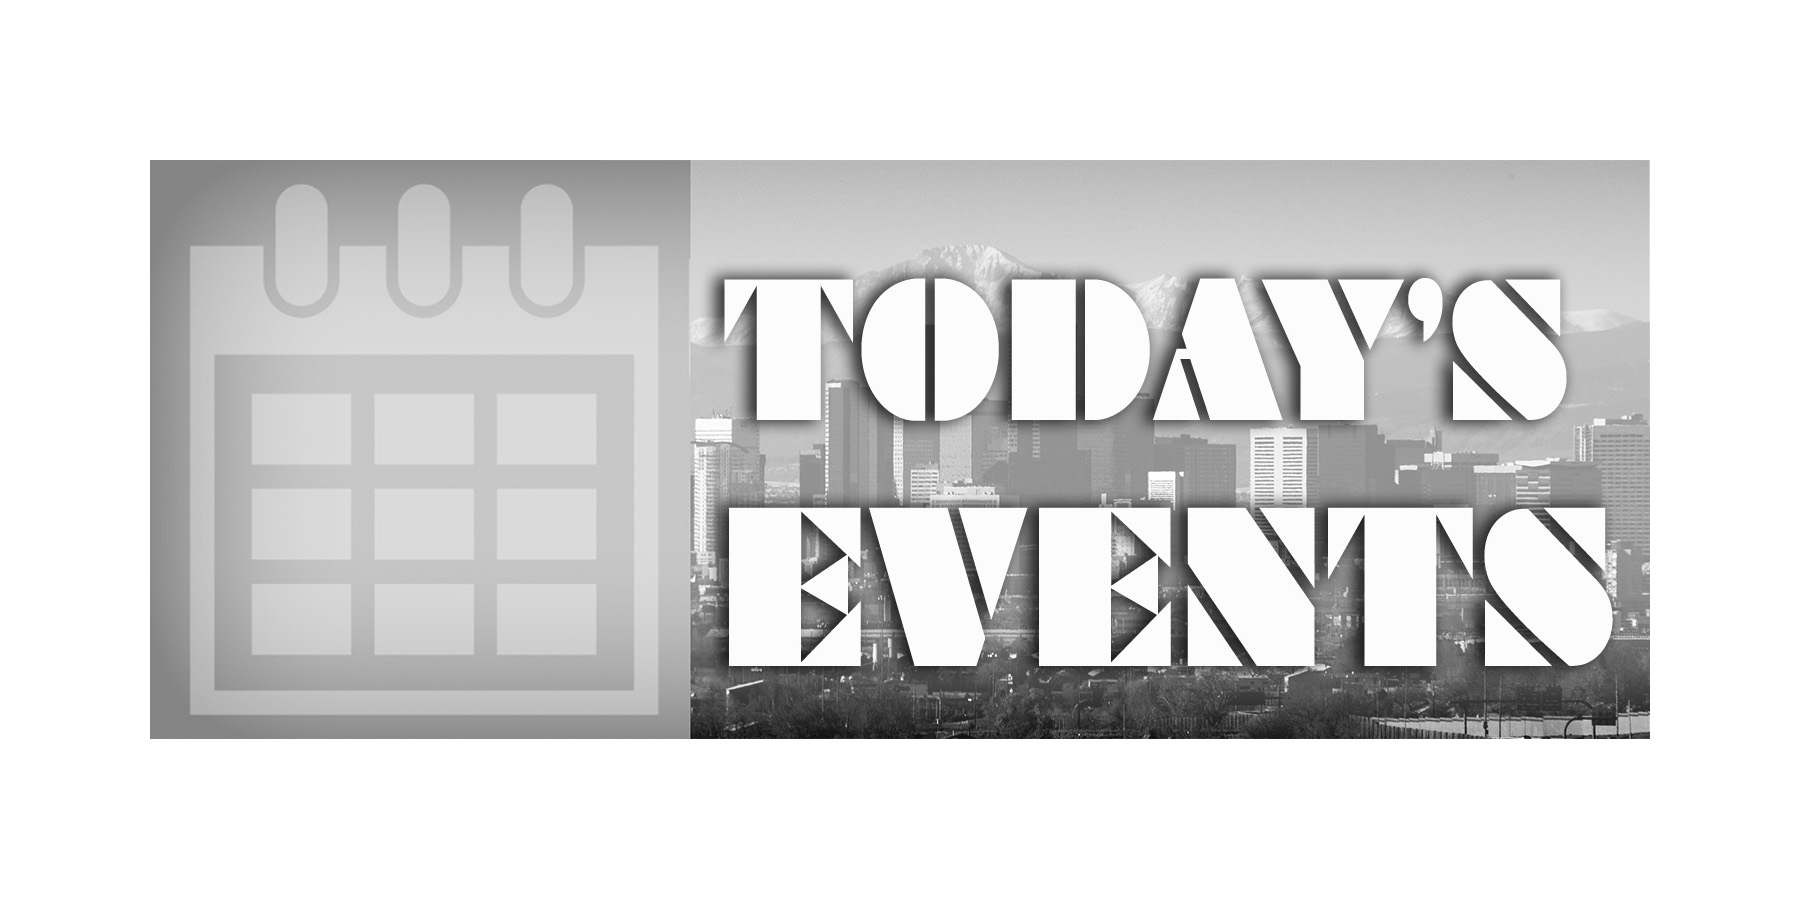 TODAY’S EVENTS TUESDAY, OCTOBER 3 I70 Scout & Eastern Colorado News